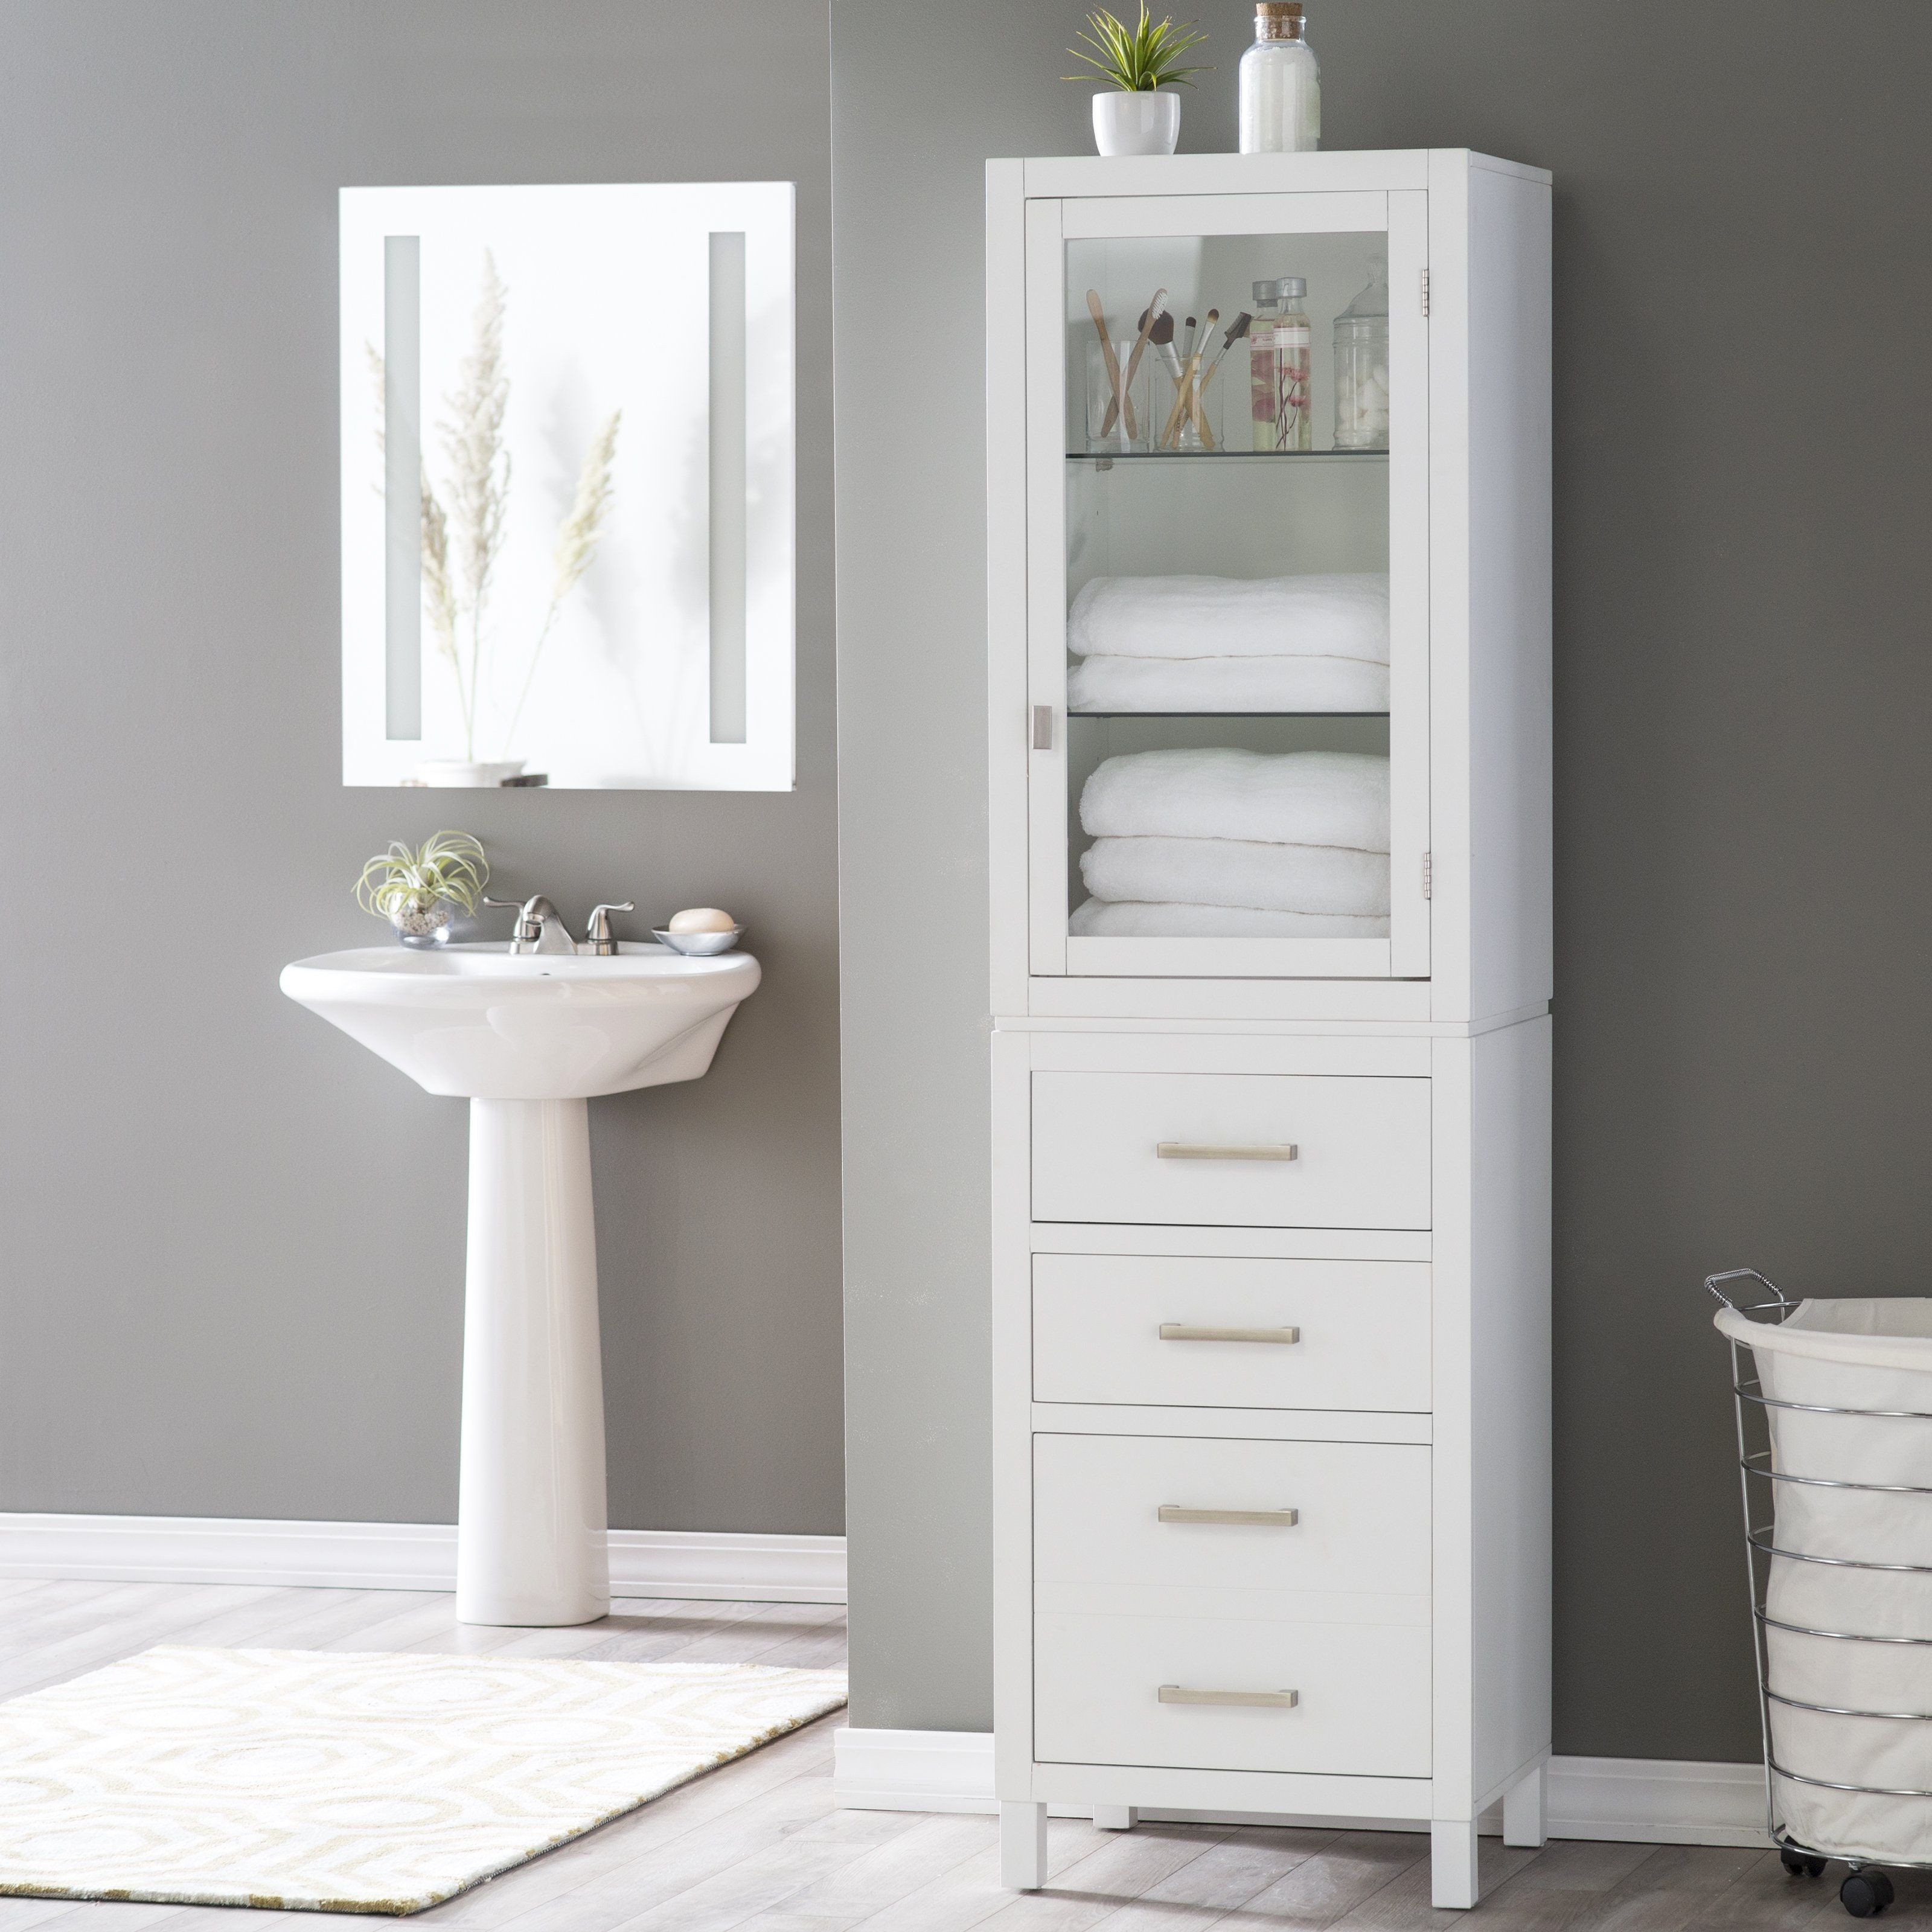 Inspirational Tall Corner Bathroom Cabinet throughout sizing 3200 X 3200